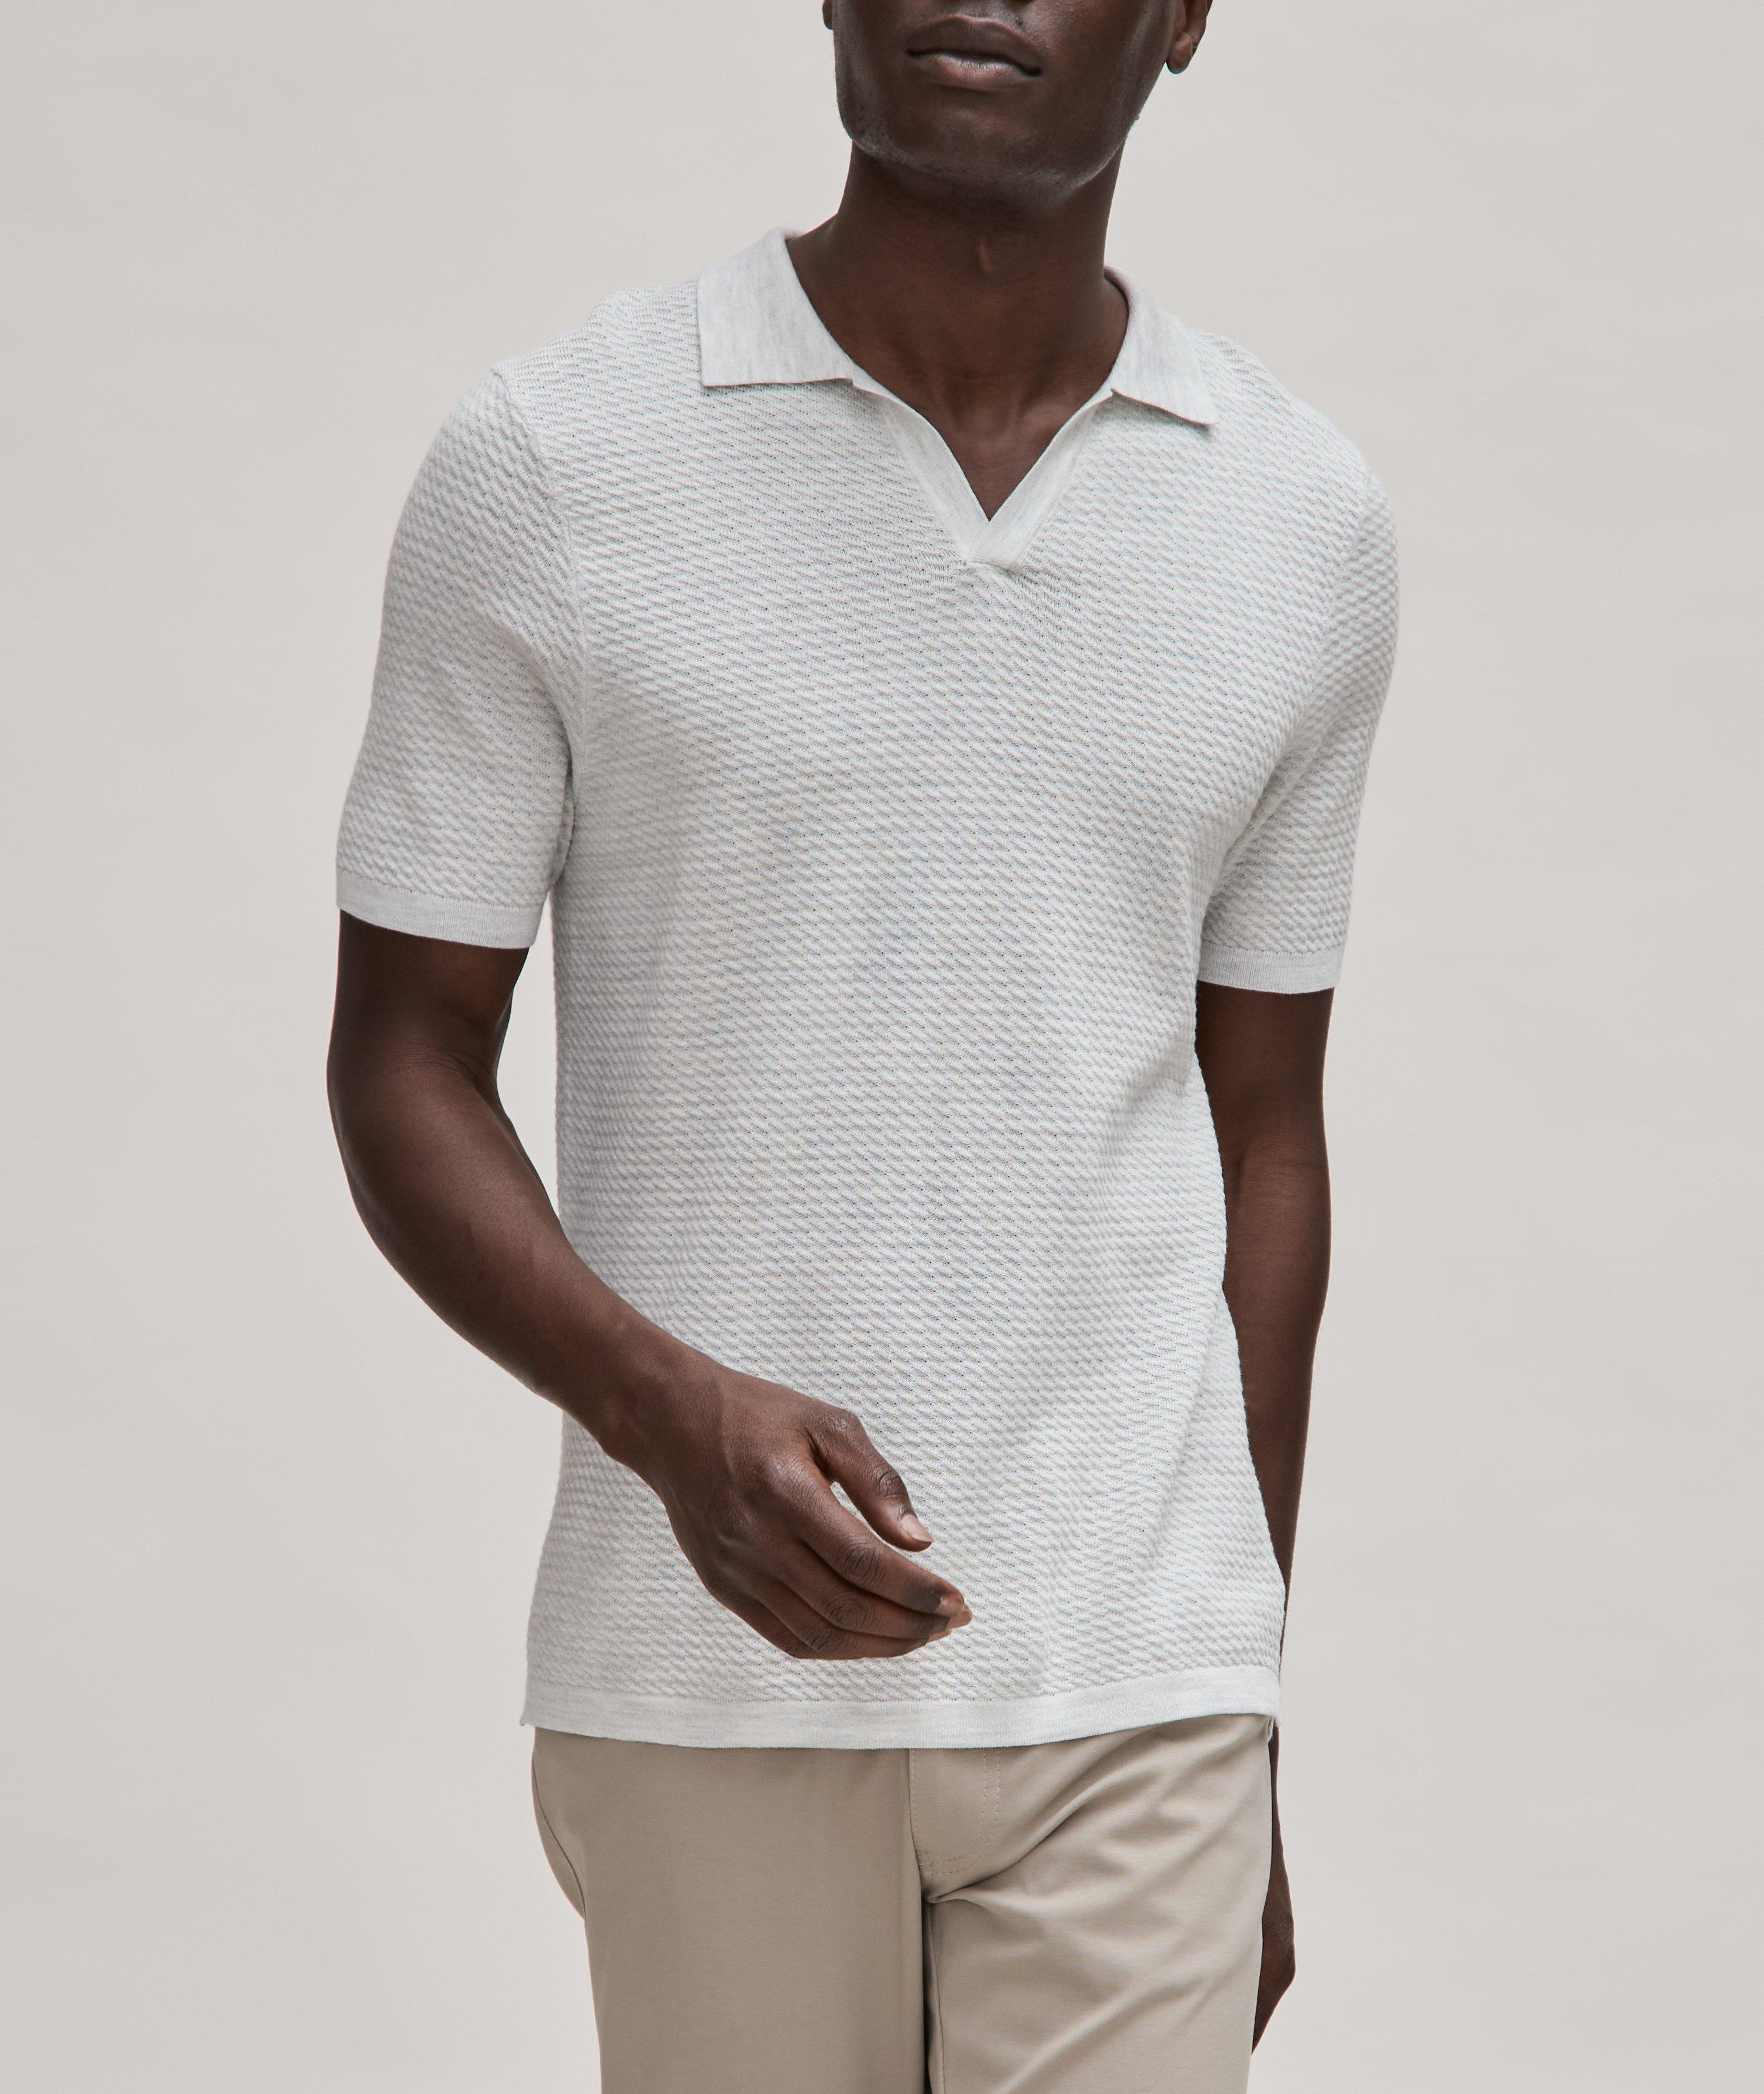 Textured Cotton-Blend Knit Polo  image 1